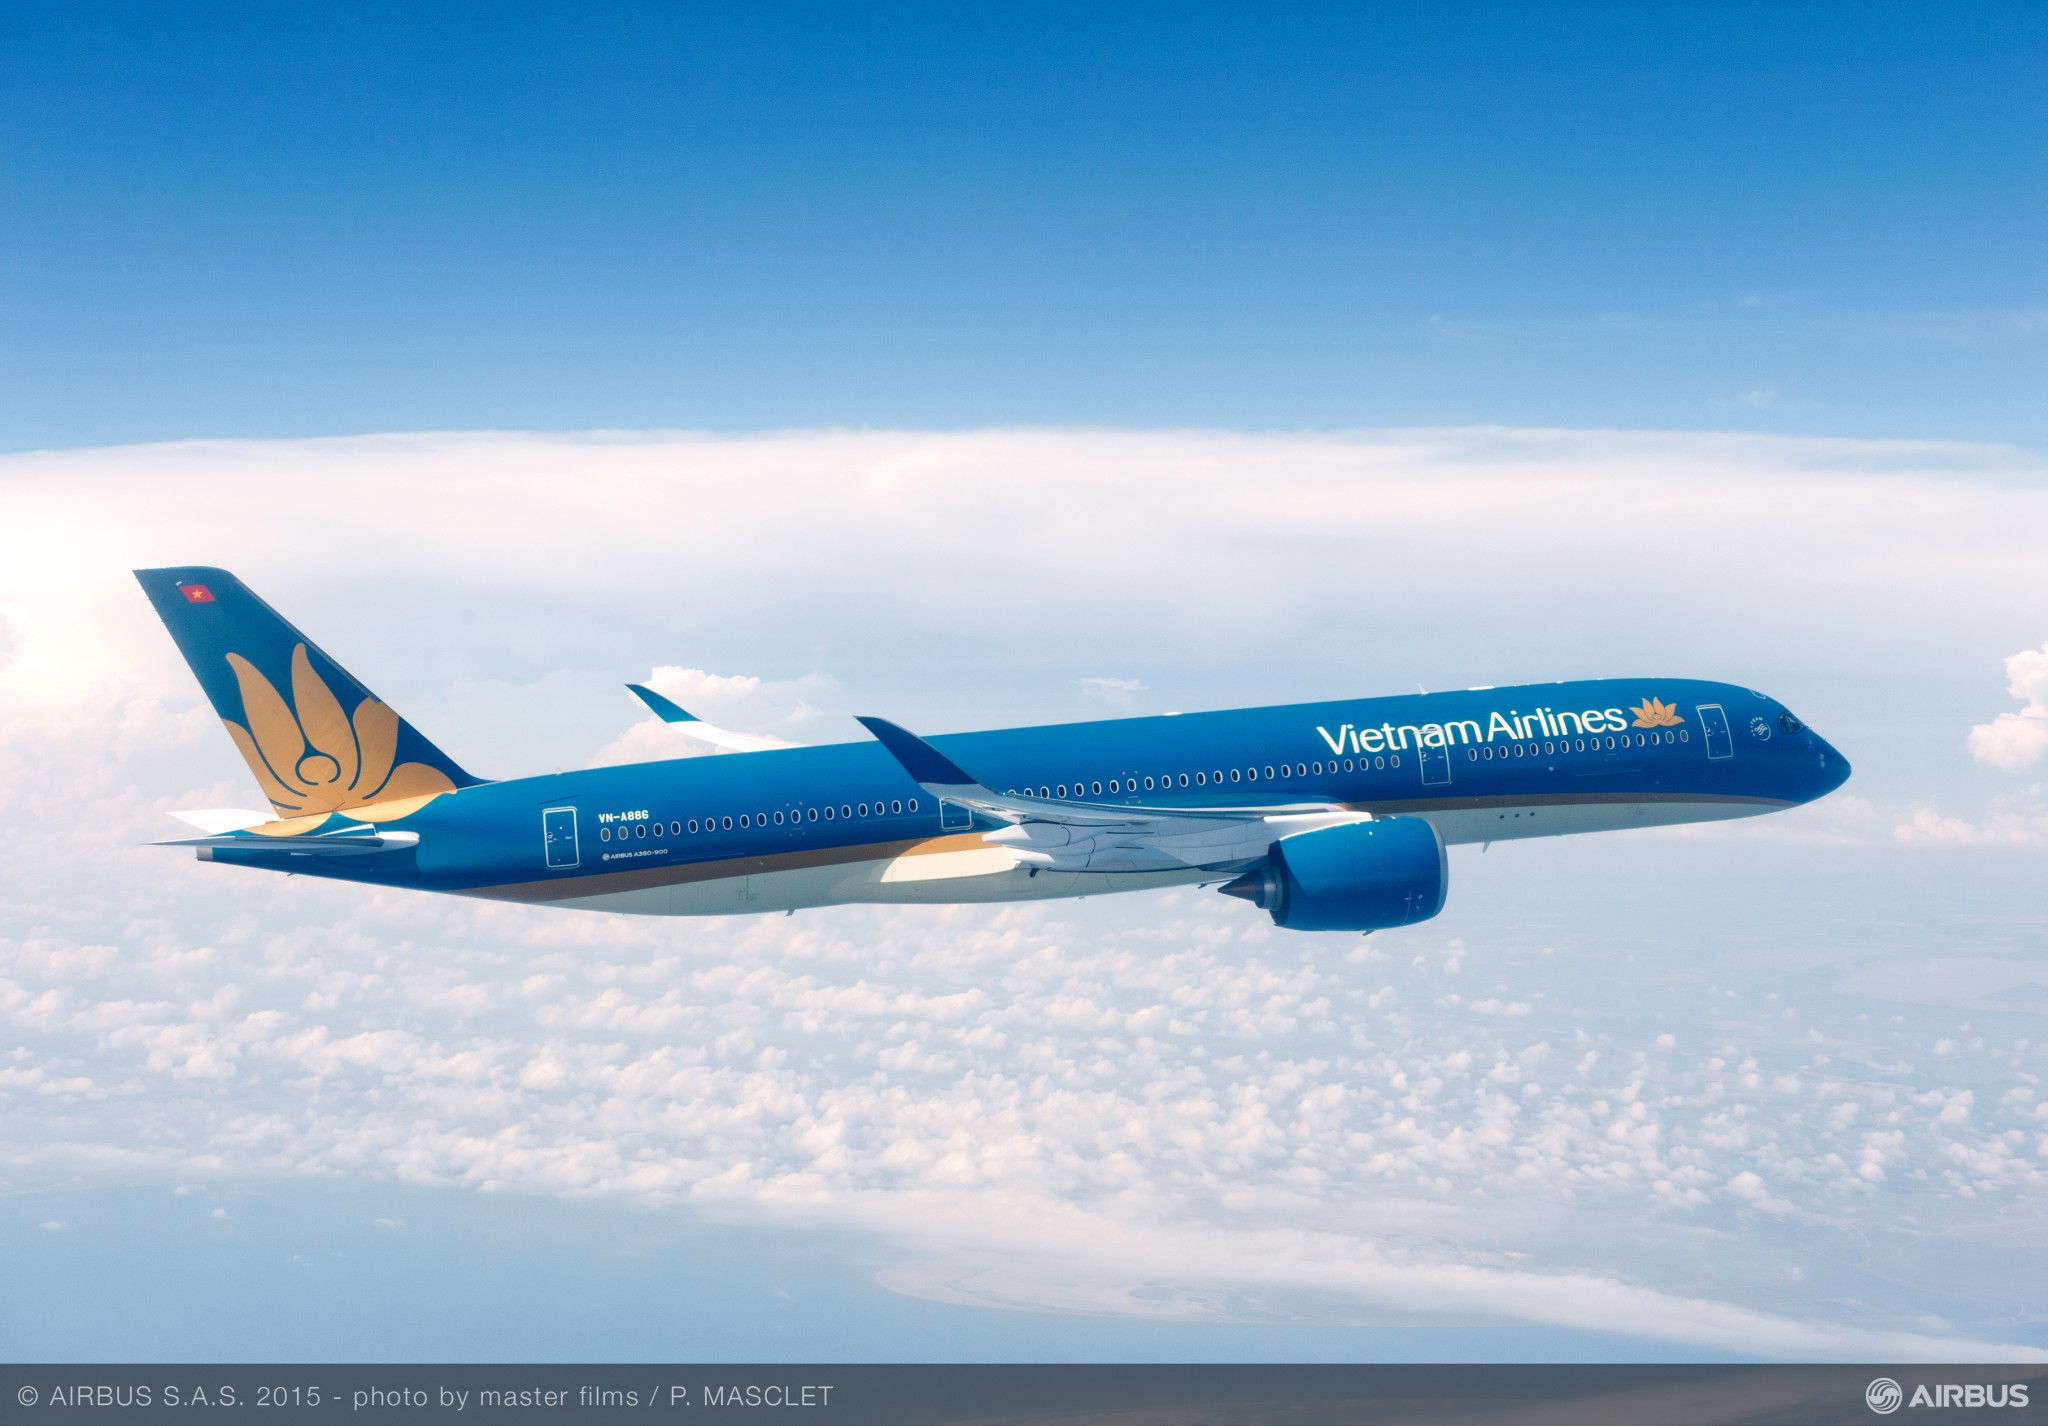 Vietnam Airlines signs MoU with Visa to improve digital capabilities